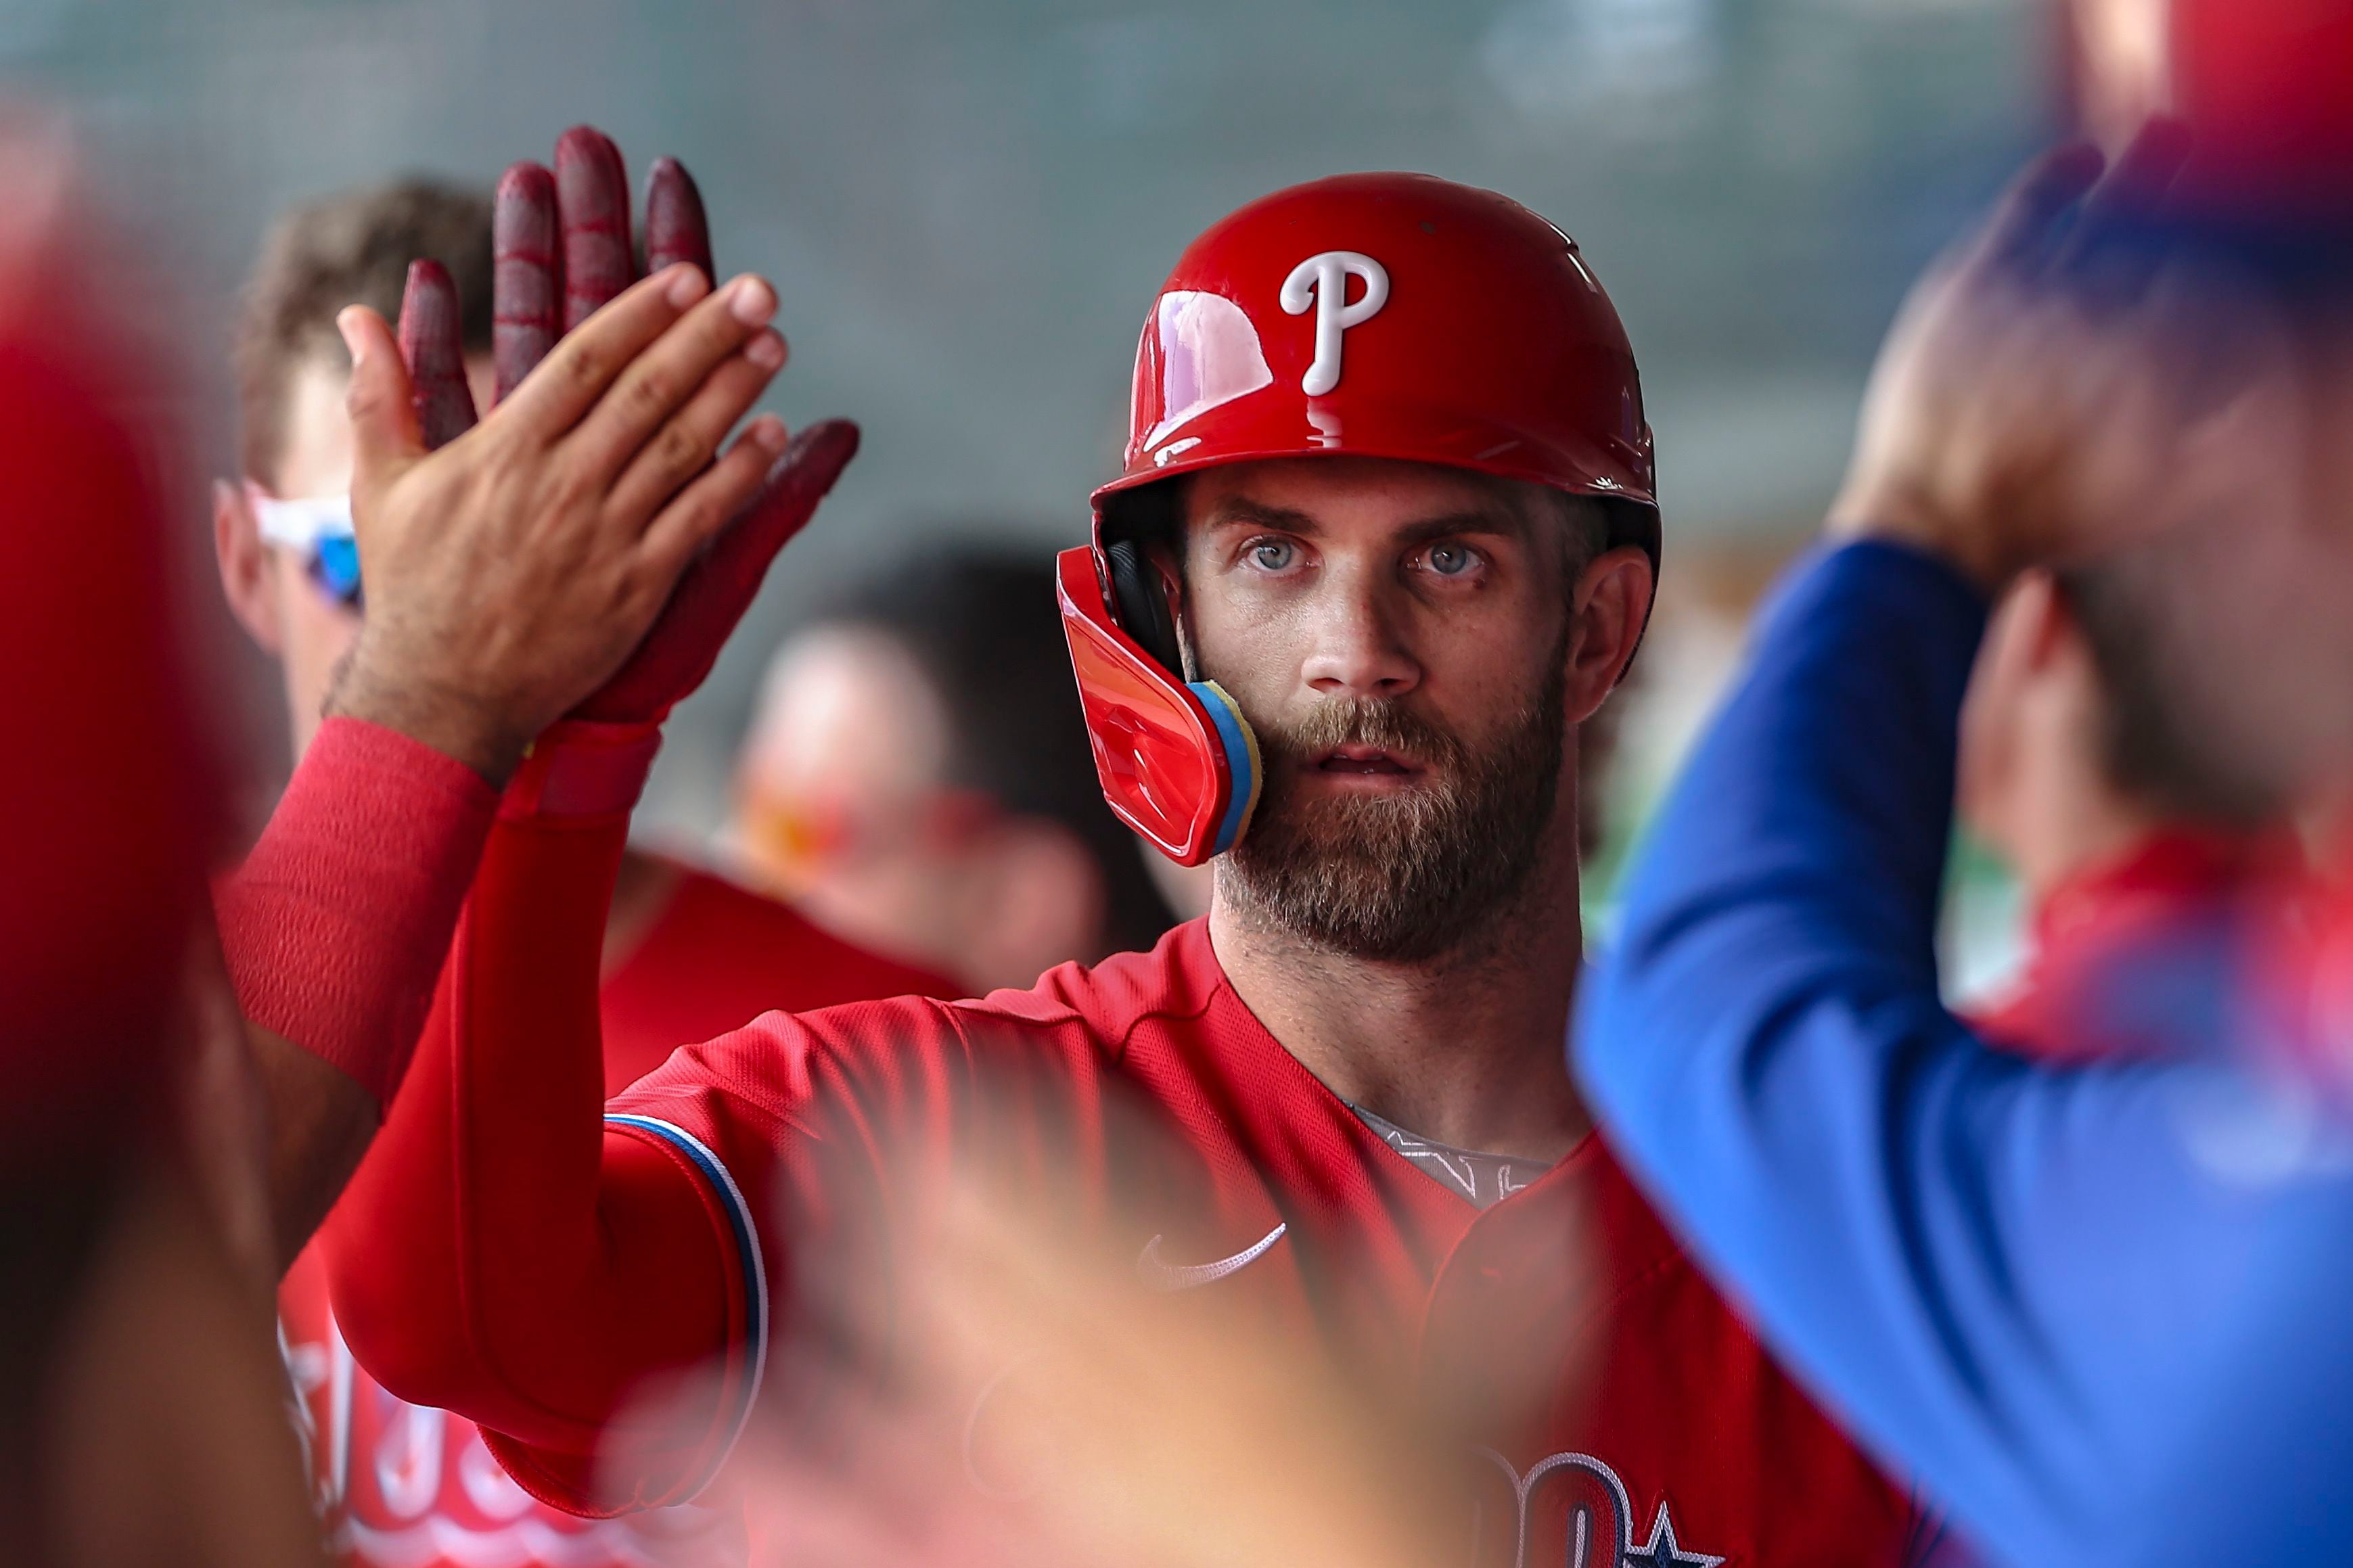 Eagles players react to Bryce Harper's mega-deal with Phillies 